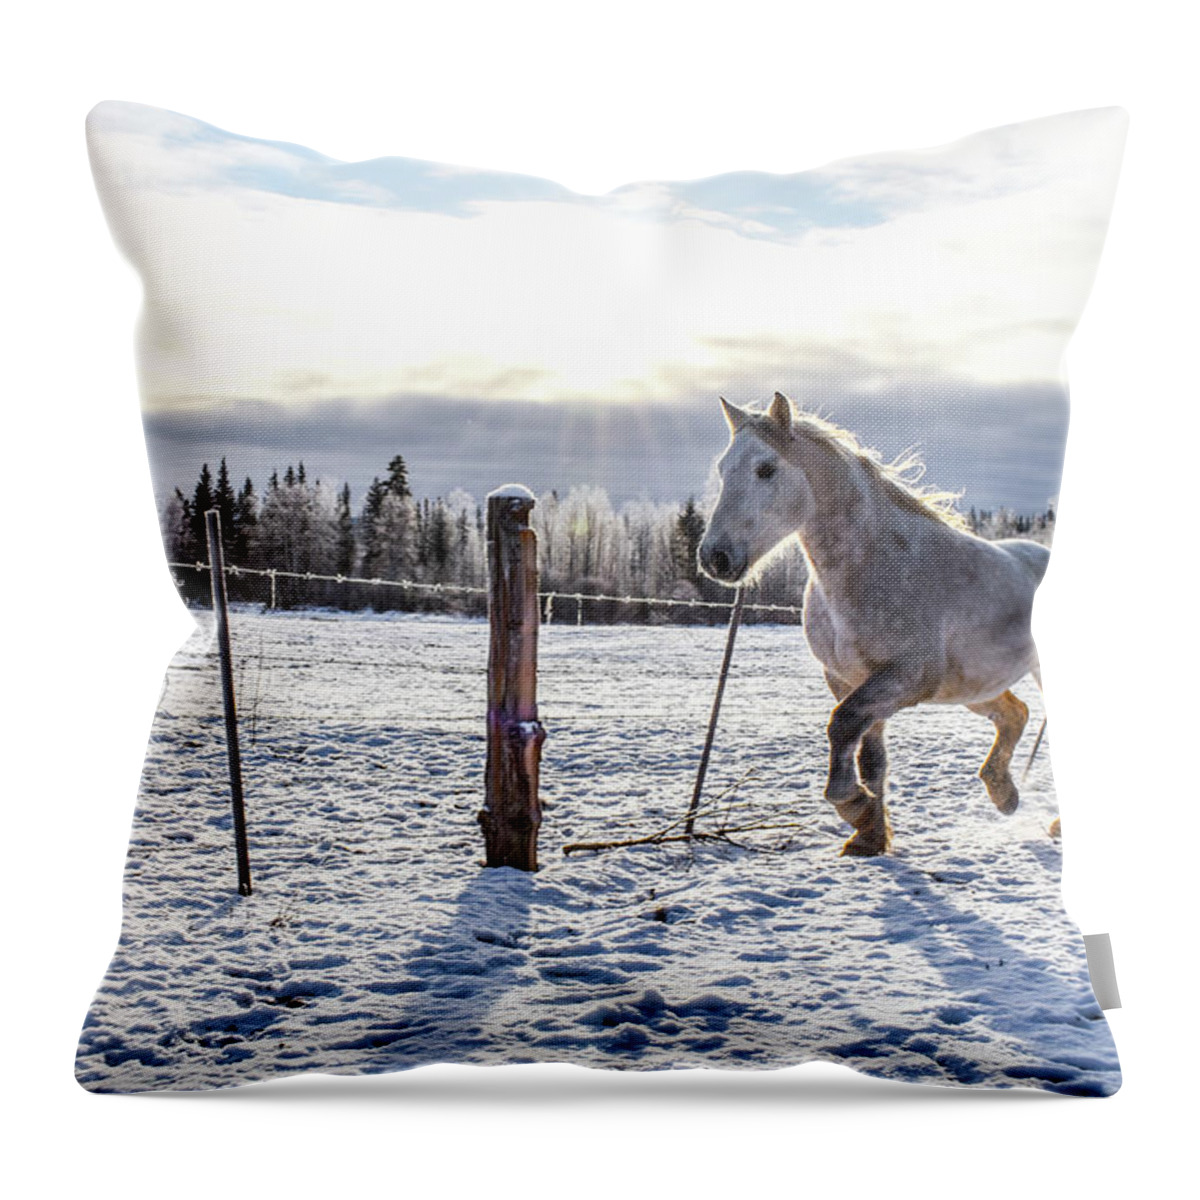 Winter Throw Pillow featuring the photograph Sunlit Passage by Listen To Your Horse